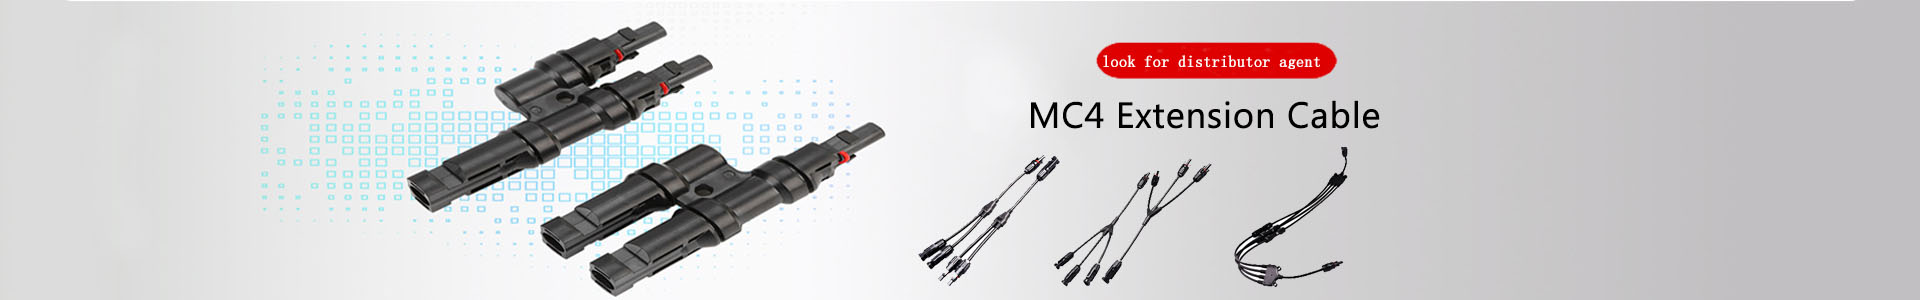 Vietnam Farm Solar Project-Solar power plant project-Solar | solar connector,solar branch connector,diode fuse connector,MC4 extnsion cable,H1Z2Z2 solar cable, UL4703 solar cable | Leading manufacturer and supplier of solar pv cables and connectors